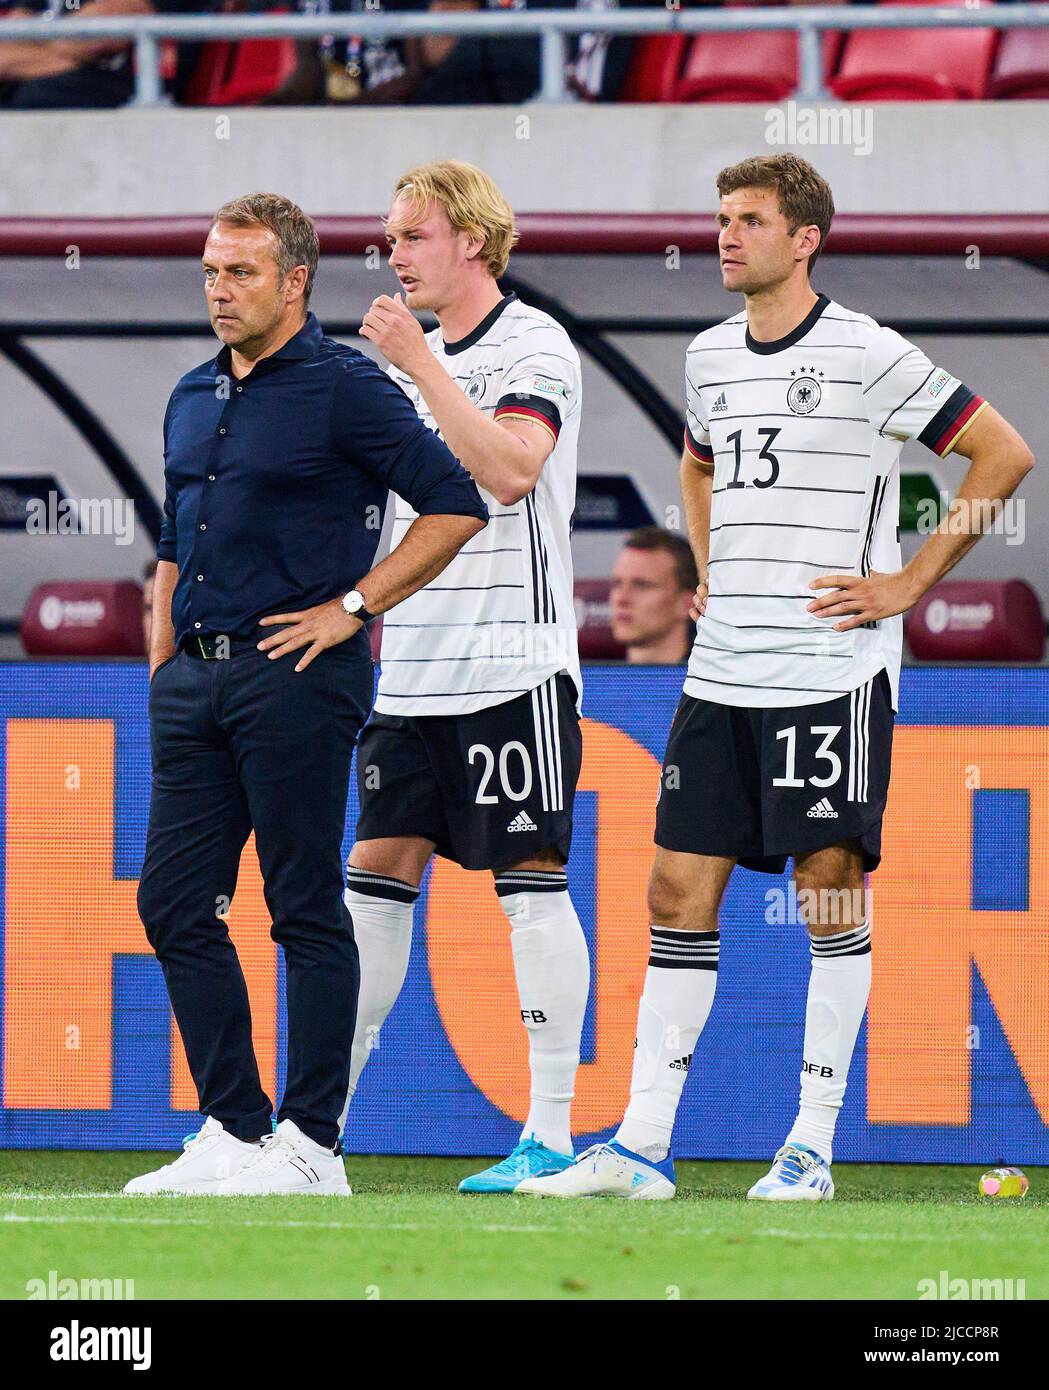 DFB headcoach Hans-Dieter Hansi Flick , Bundestrainer, Nationaltrainer, Thomas Müller, DFB 13 Julian Brandt, DFB 20  in the UEFA Nations League 2022 match HUNGARY - GERMANY 1-1  in Season 2022/2023 on Juni 11, 2022  in Budapest, Hungary.  © Peter Schatz / Alamy Live News Stock Photo